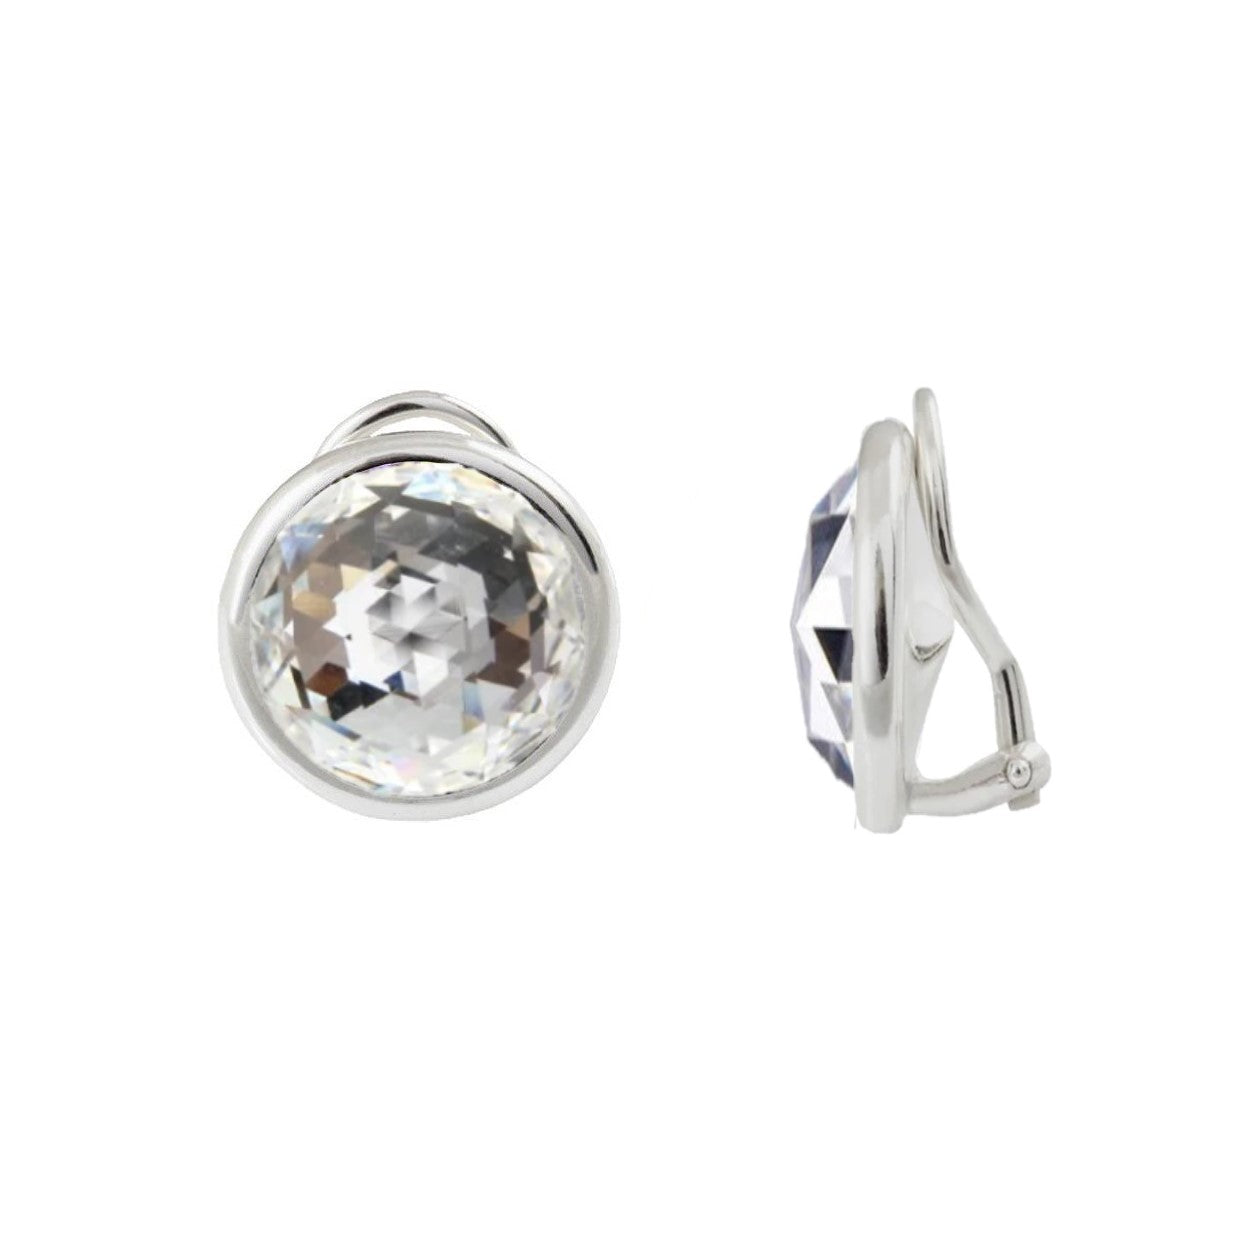 Crystal Clarity Rose-Cut Clip-On Earrings in Sterling Silver - Side View